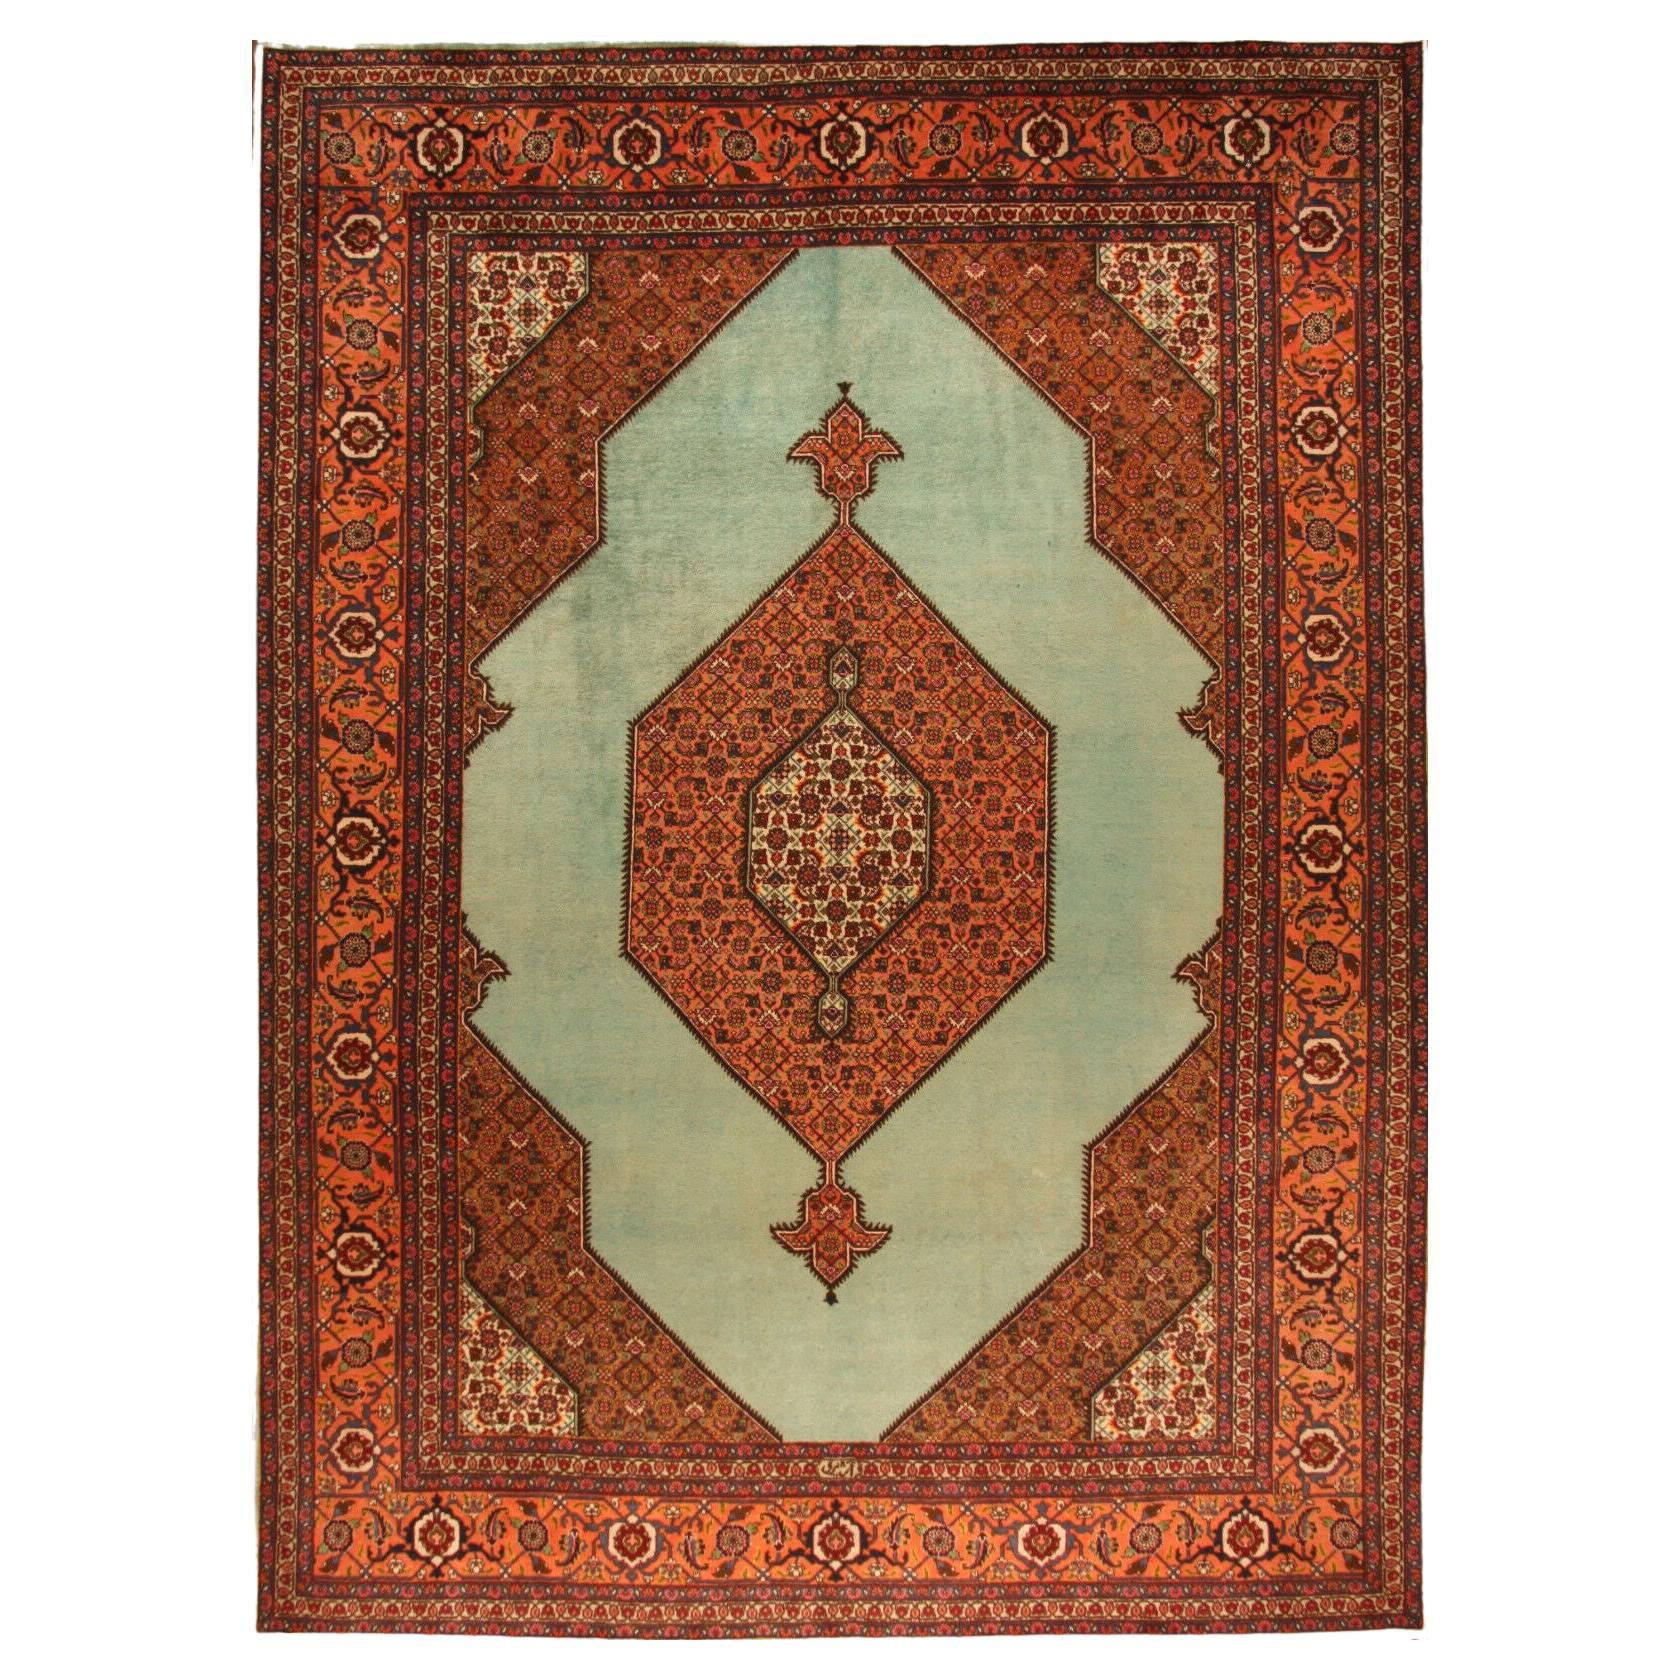 Handmade Vintage Persian Style Tabriz Rug 9.6' x 13.2', 1970s - 1T42 For Sale